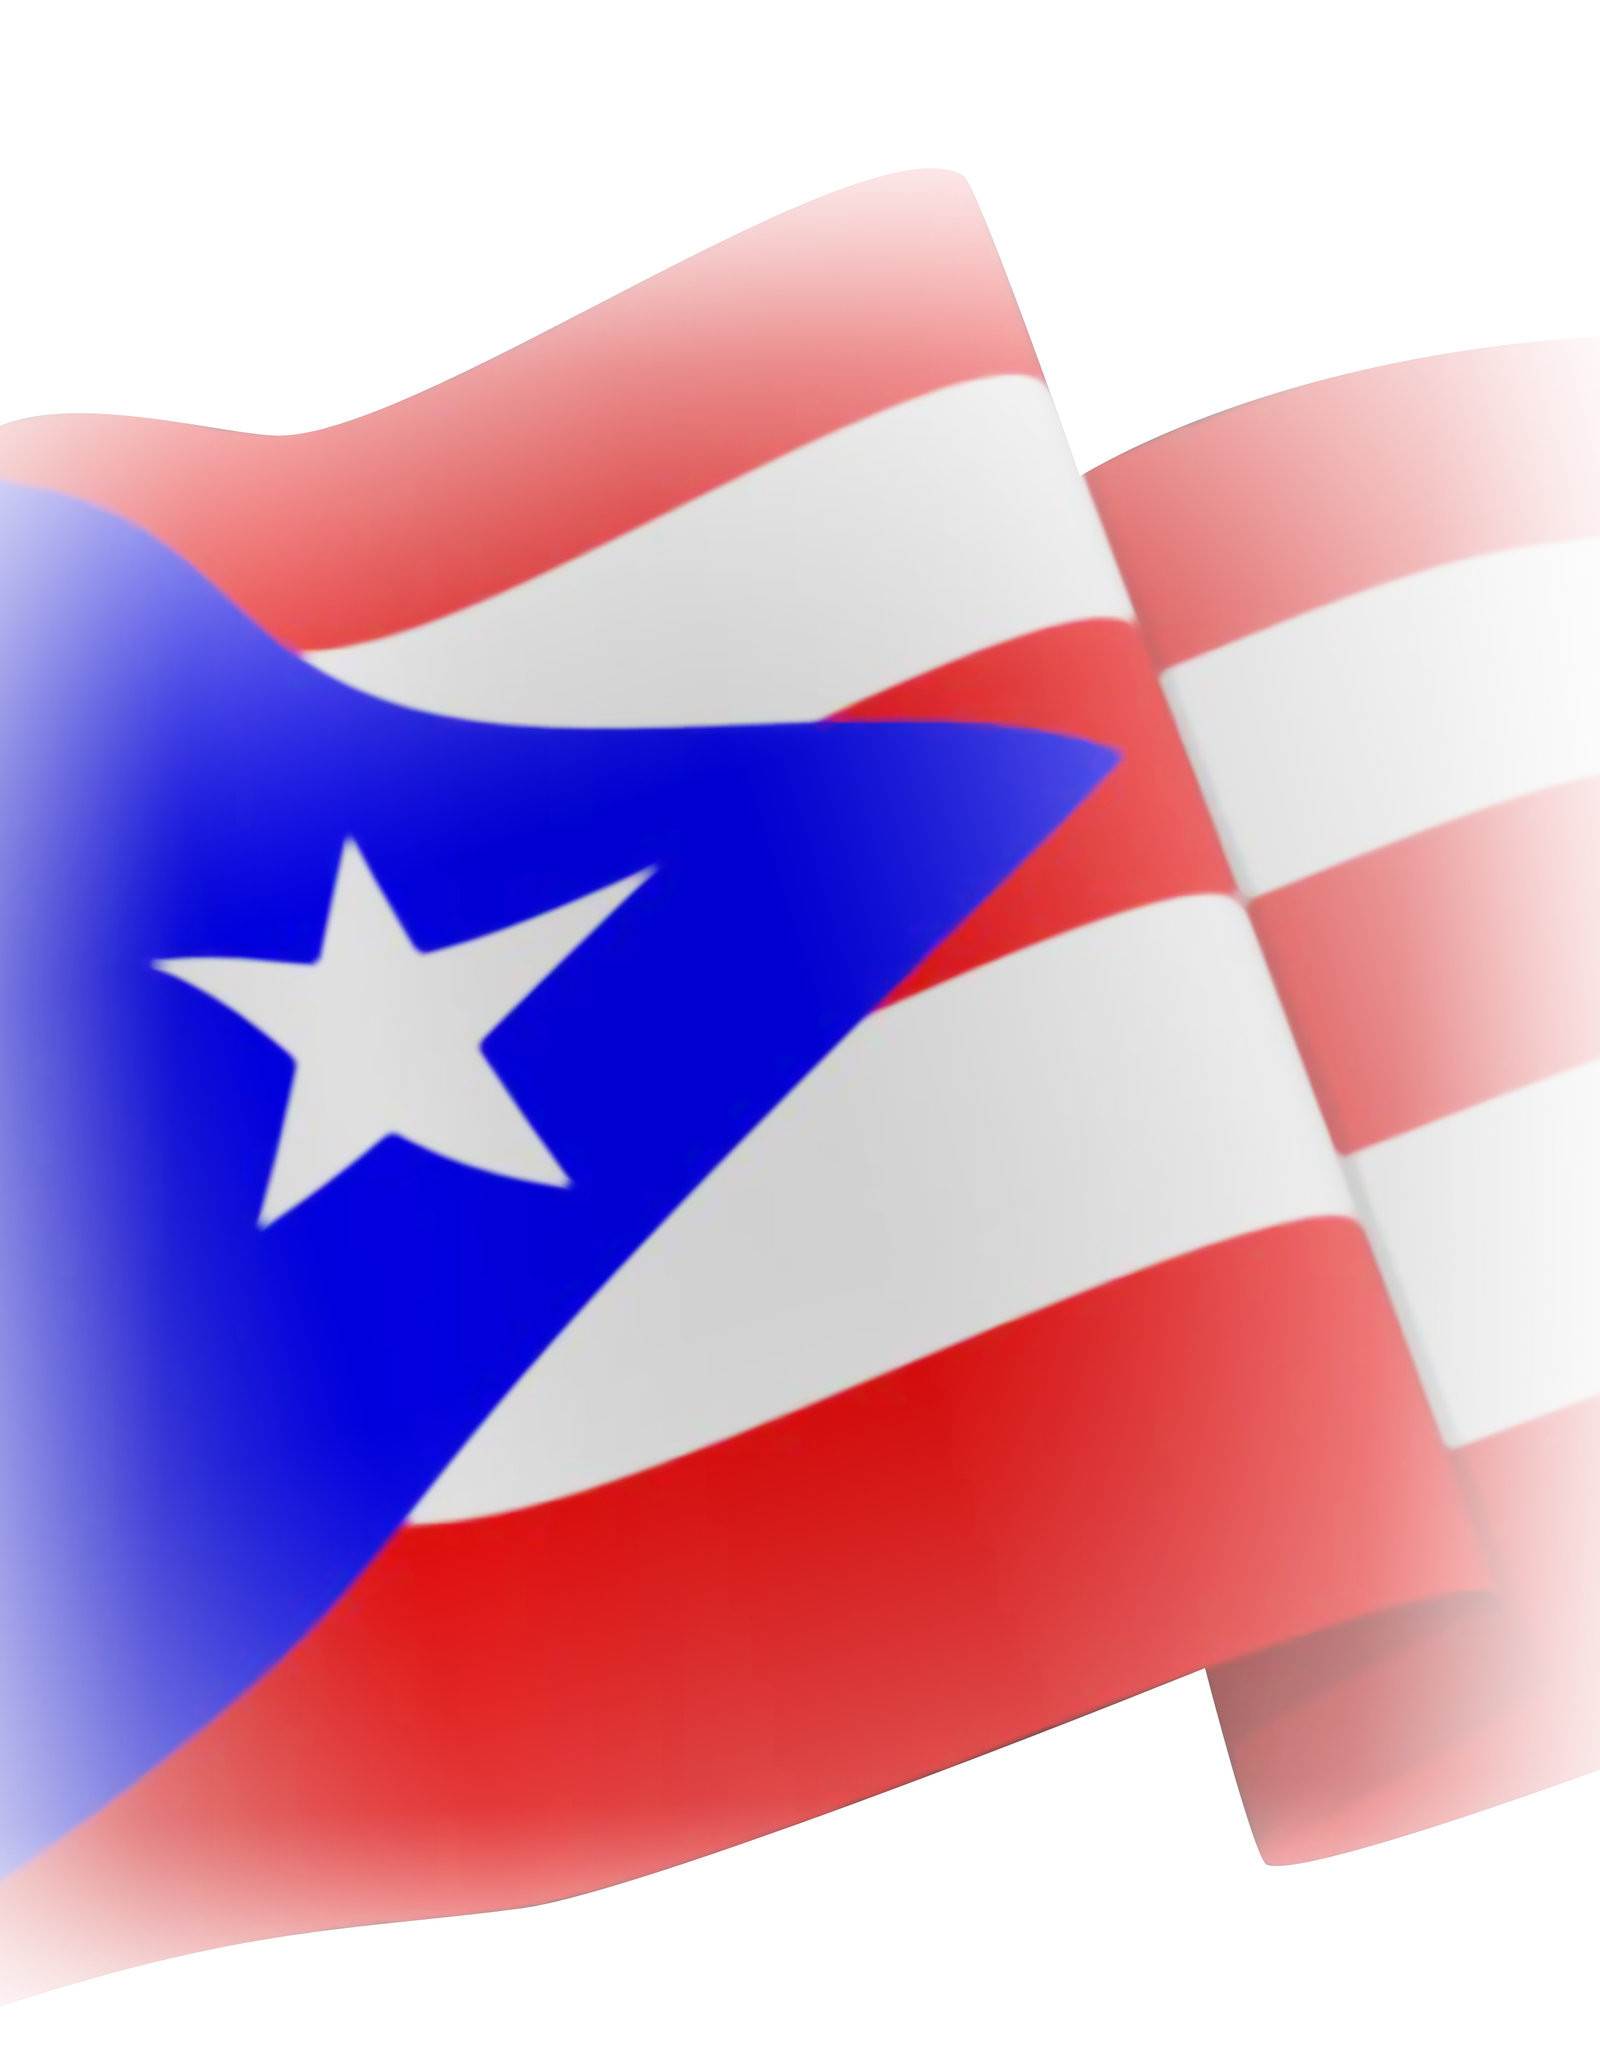 Puerto Rico Iphone Wallpapers